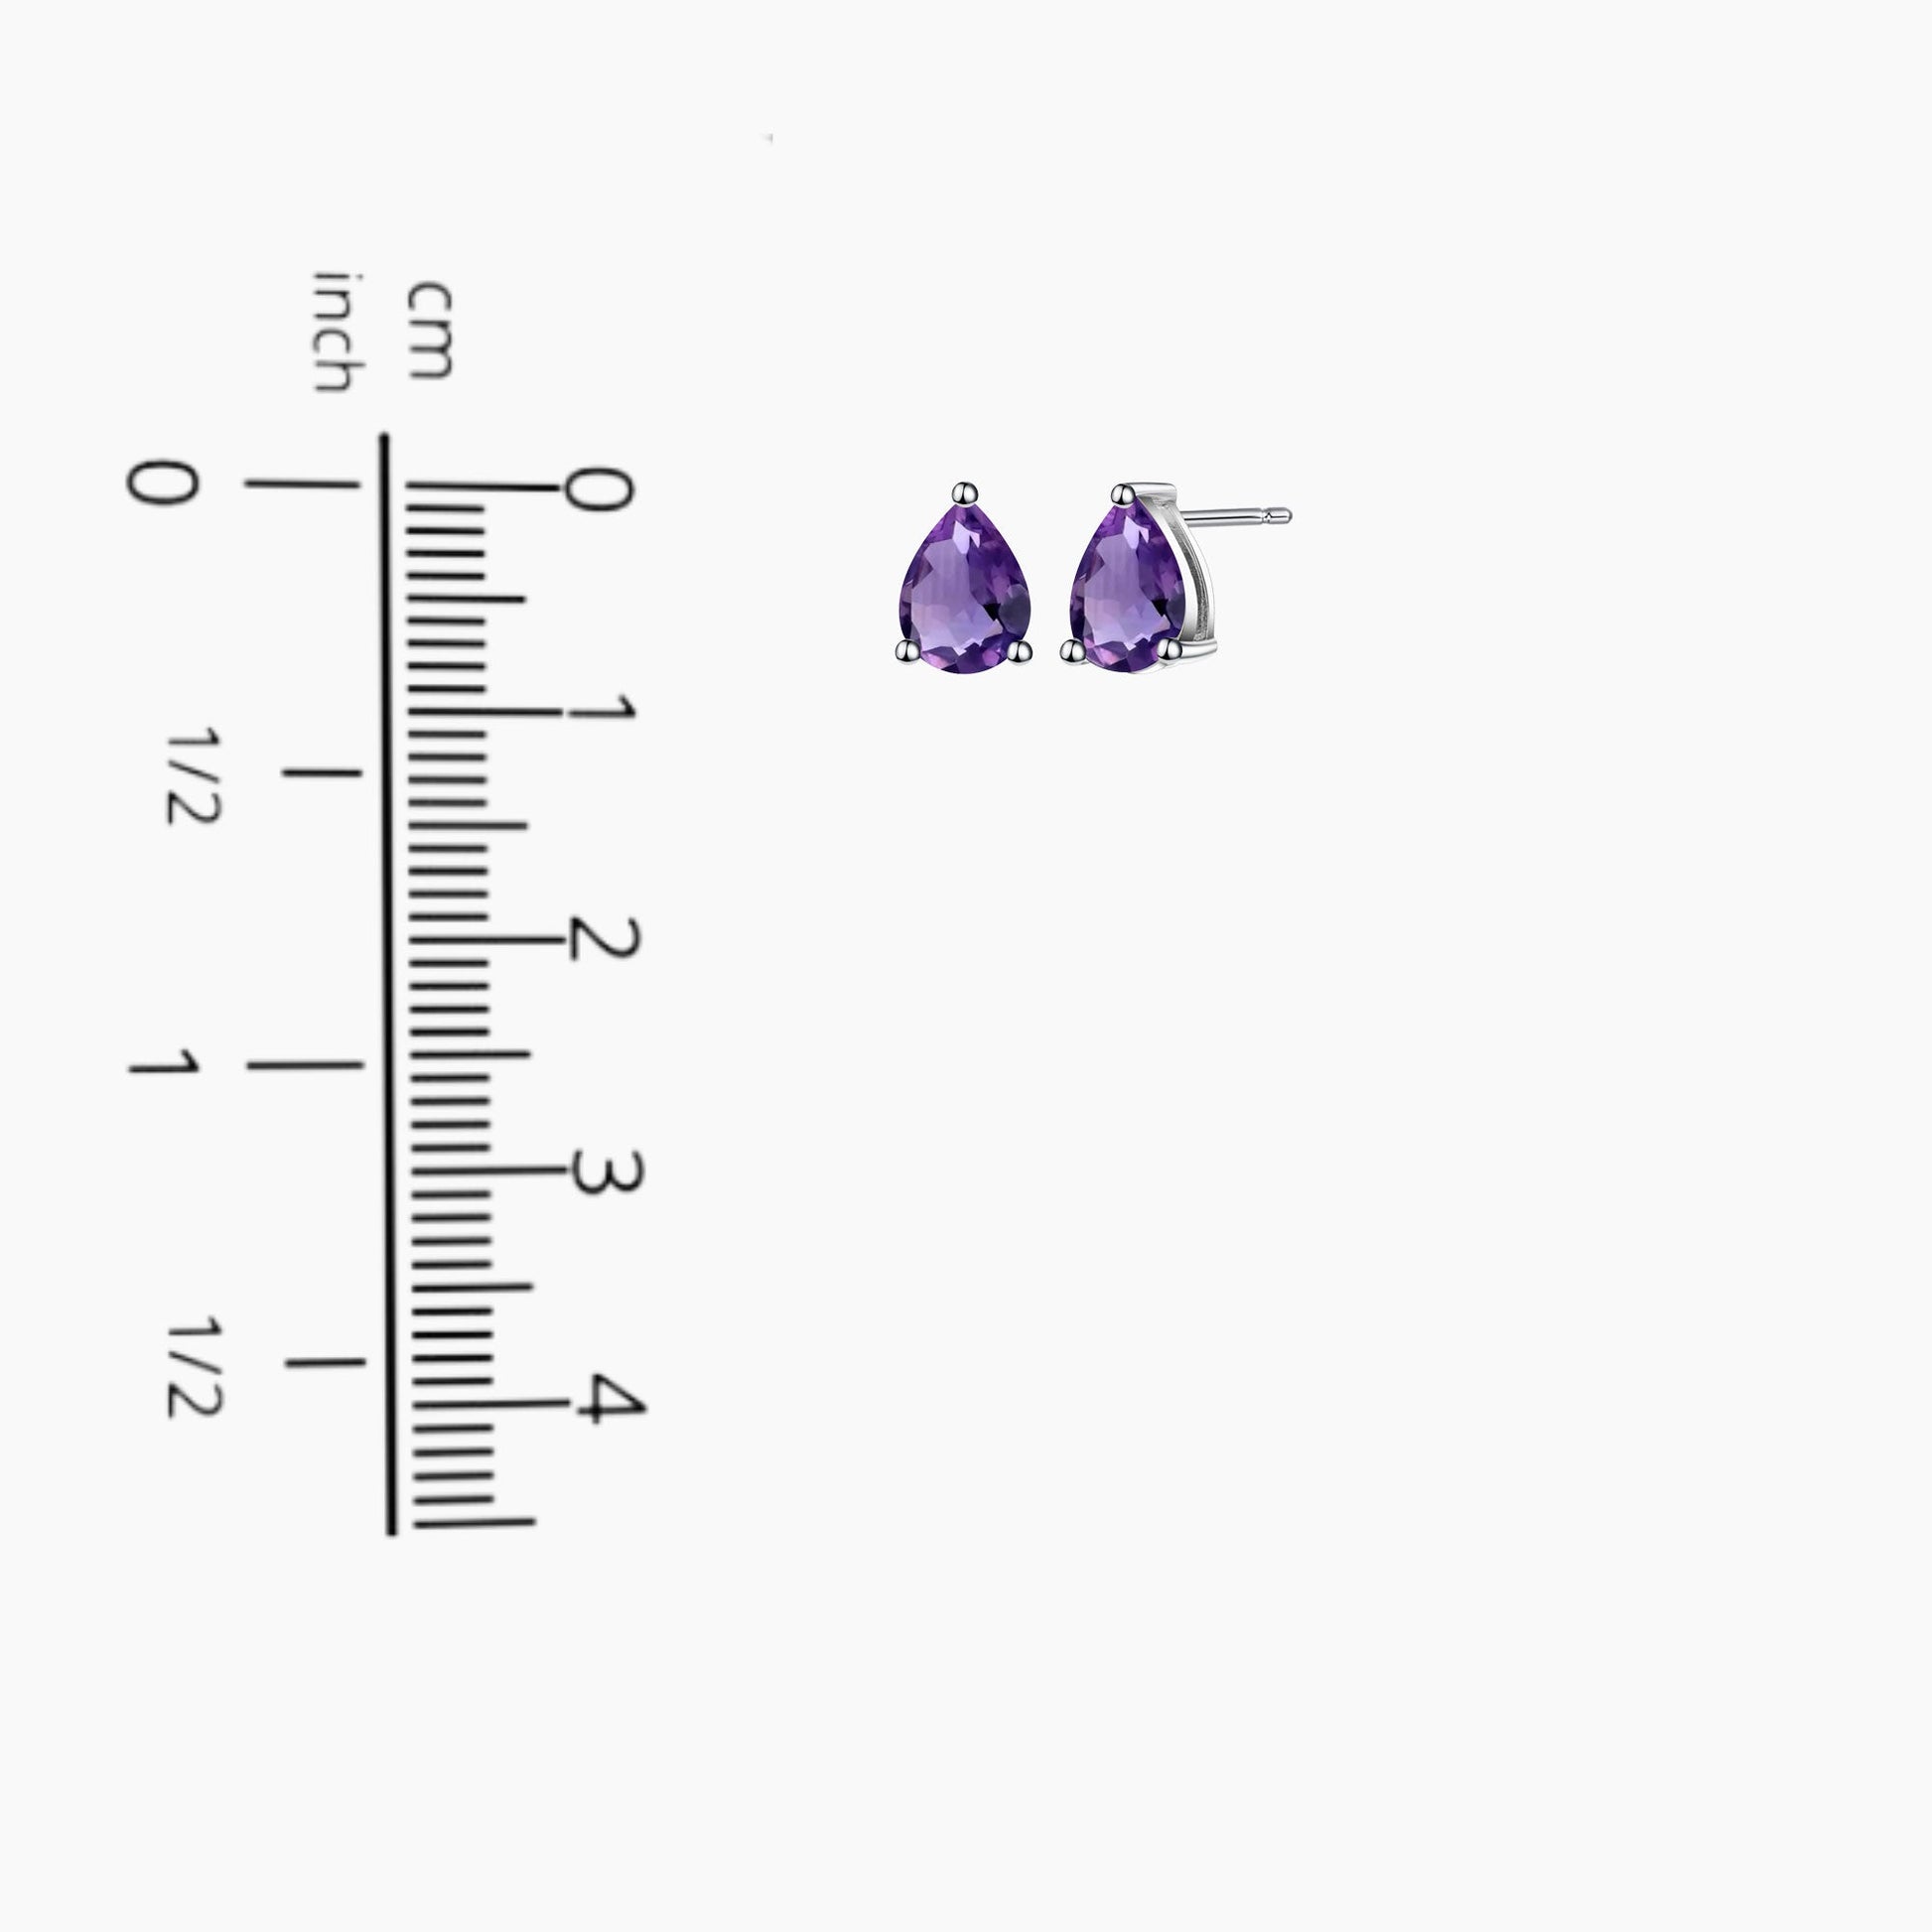 Pear Stud Earrings displayed on a scale, providing an accurate representation of their size and dimensions.